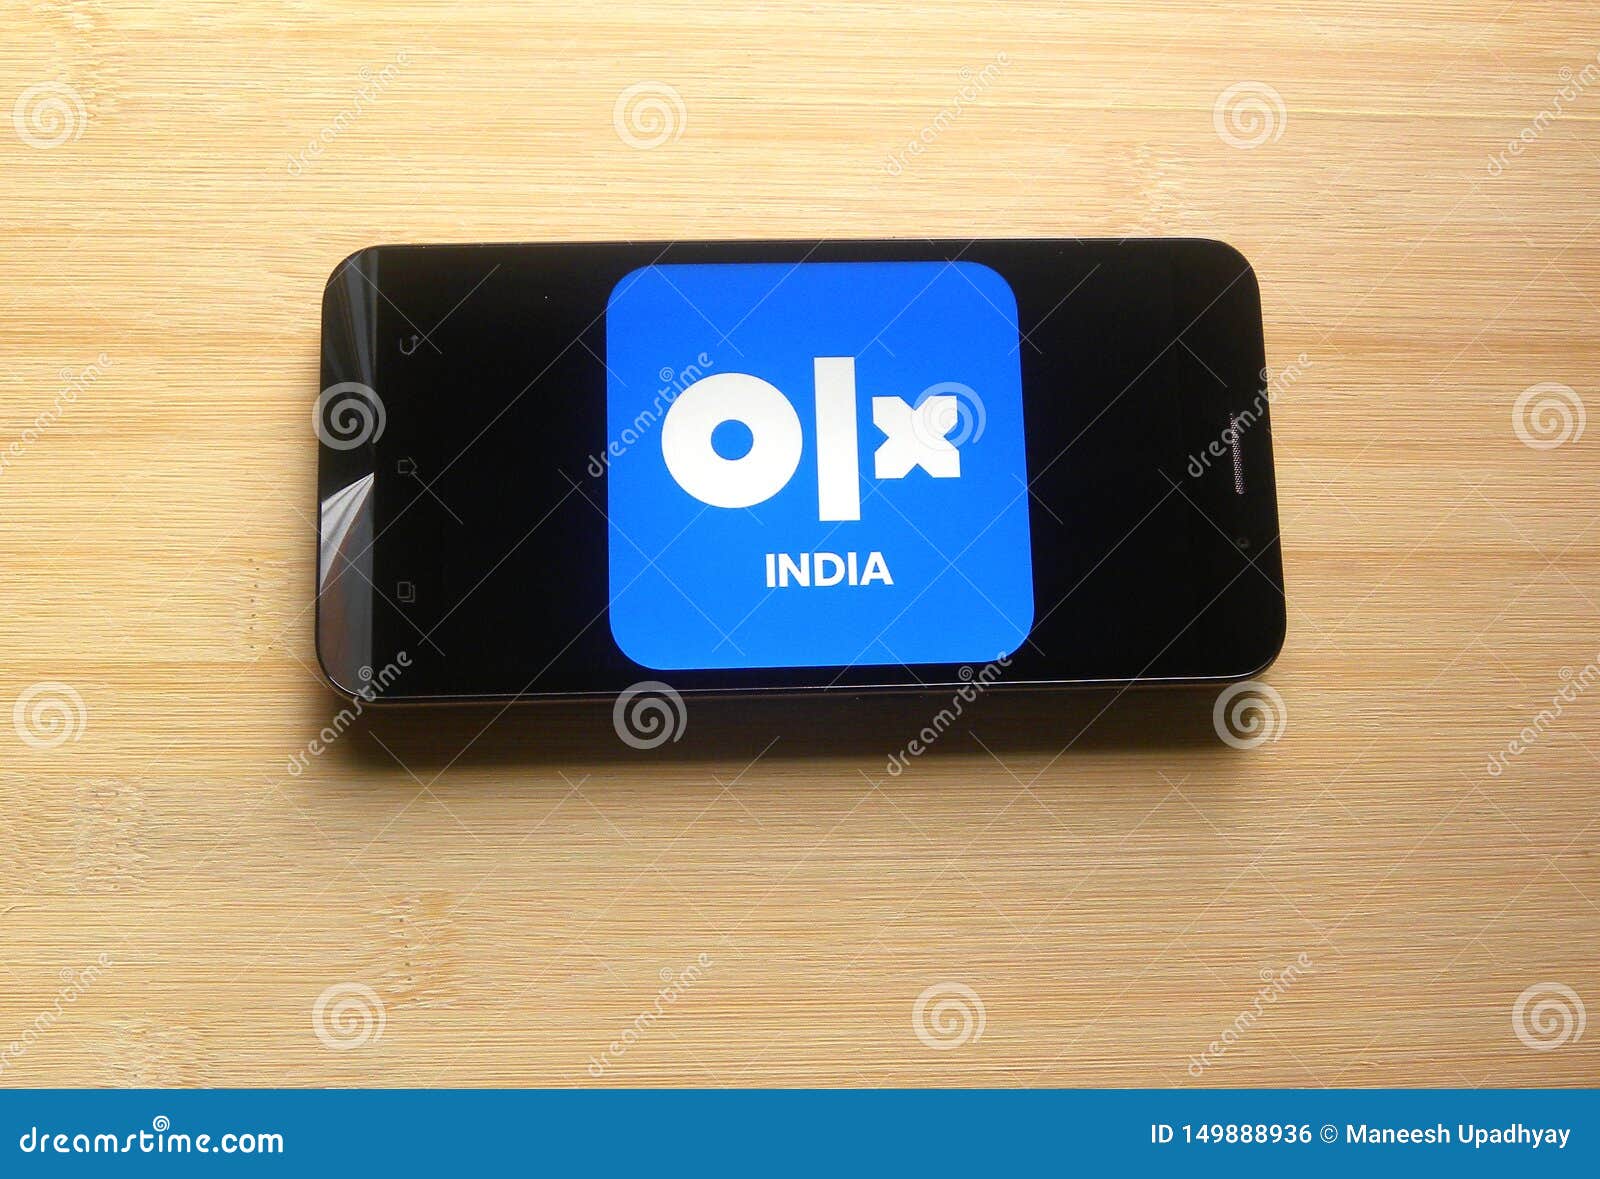 Olx App Stock Photos - Free & Royalty-Free Stock Photos from Dreamstime